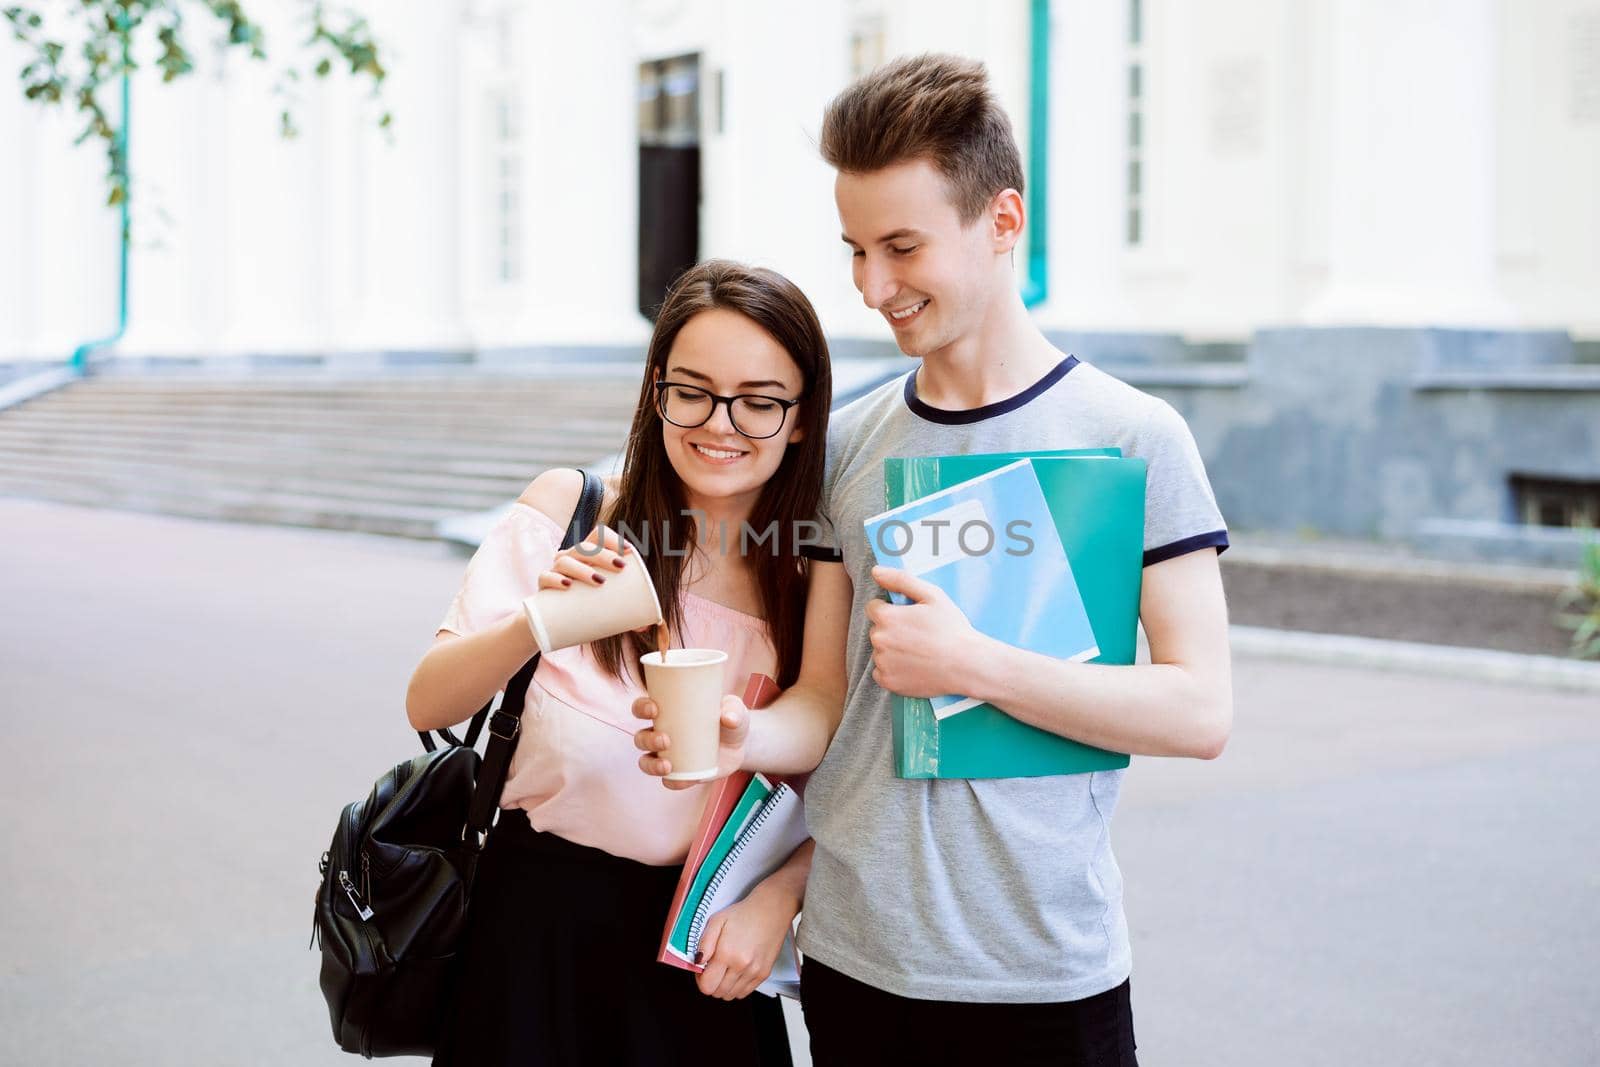 Attractive girl share some coffee with her handsome classmate, ready to help each other in difficult situation. Concept of friendship.